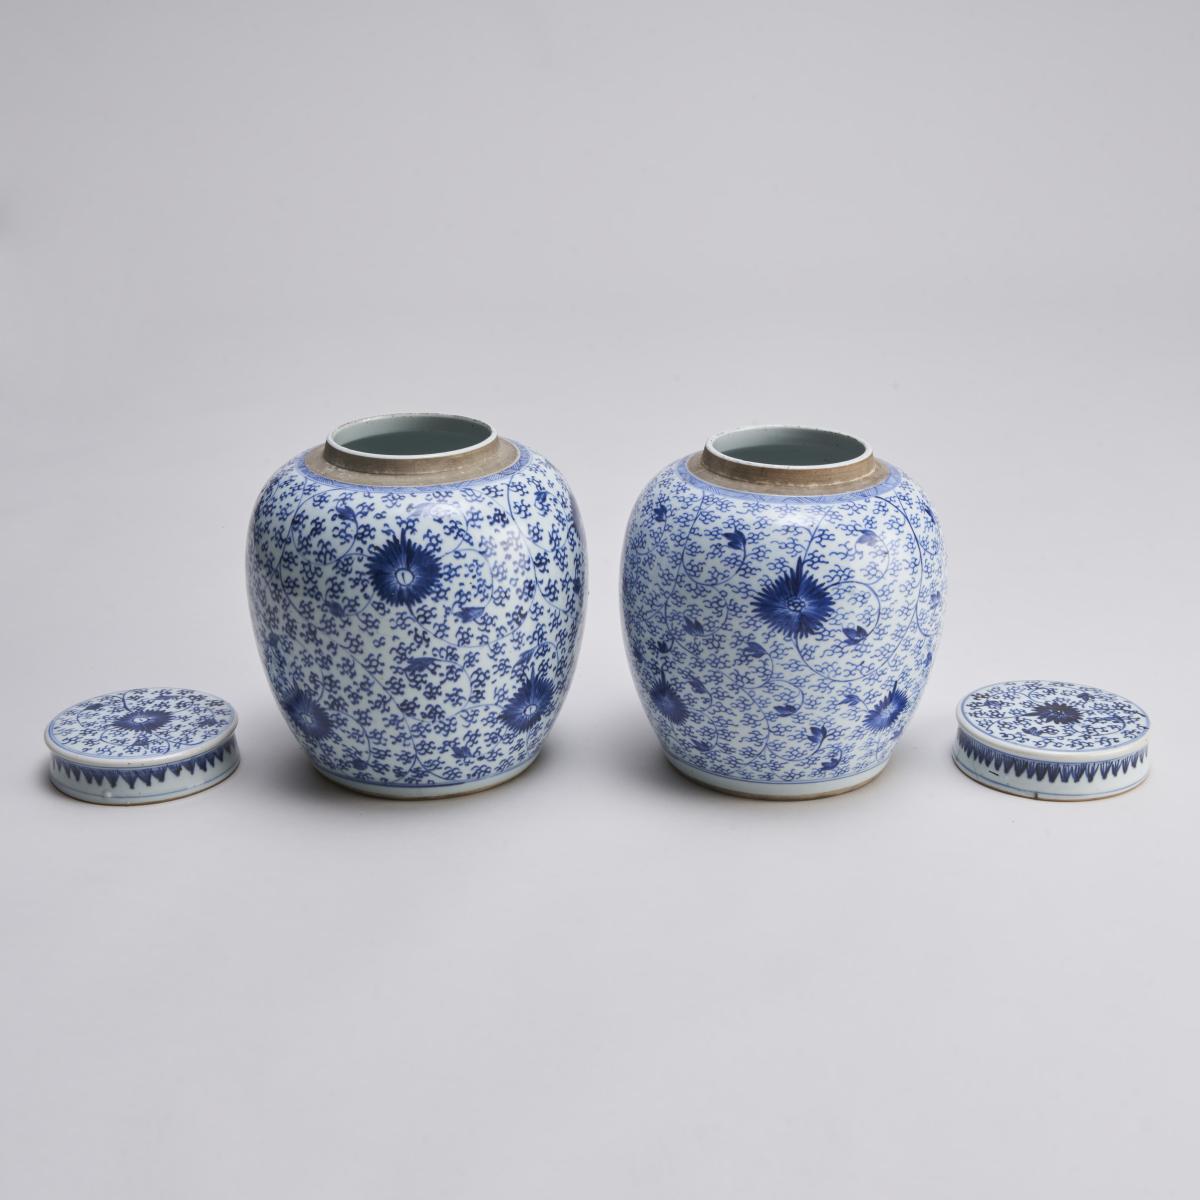 A pair of attractive, 18th Century Chinese porcelain blue and white jars and covers